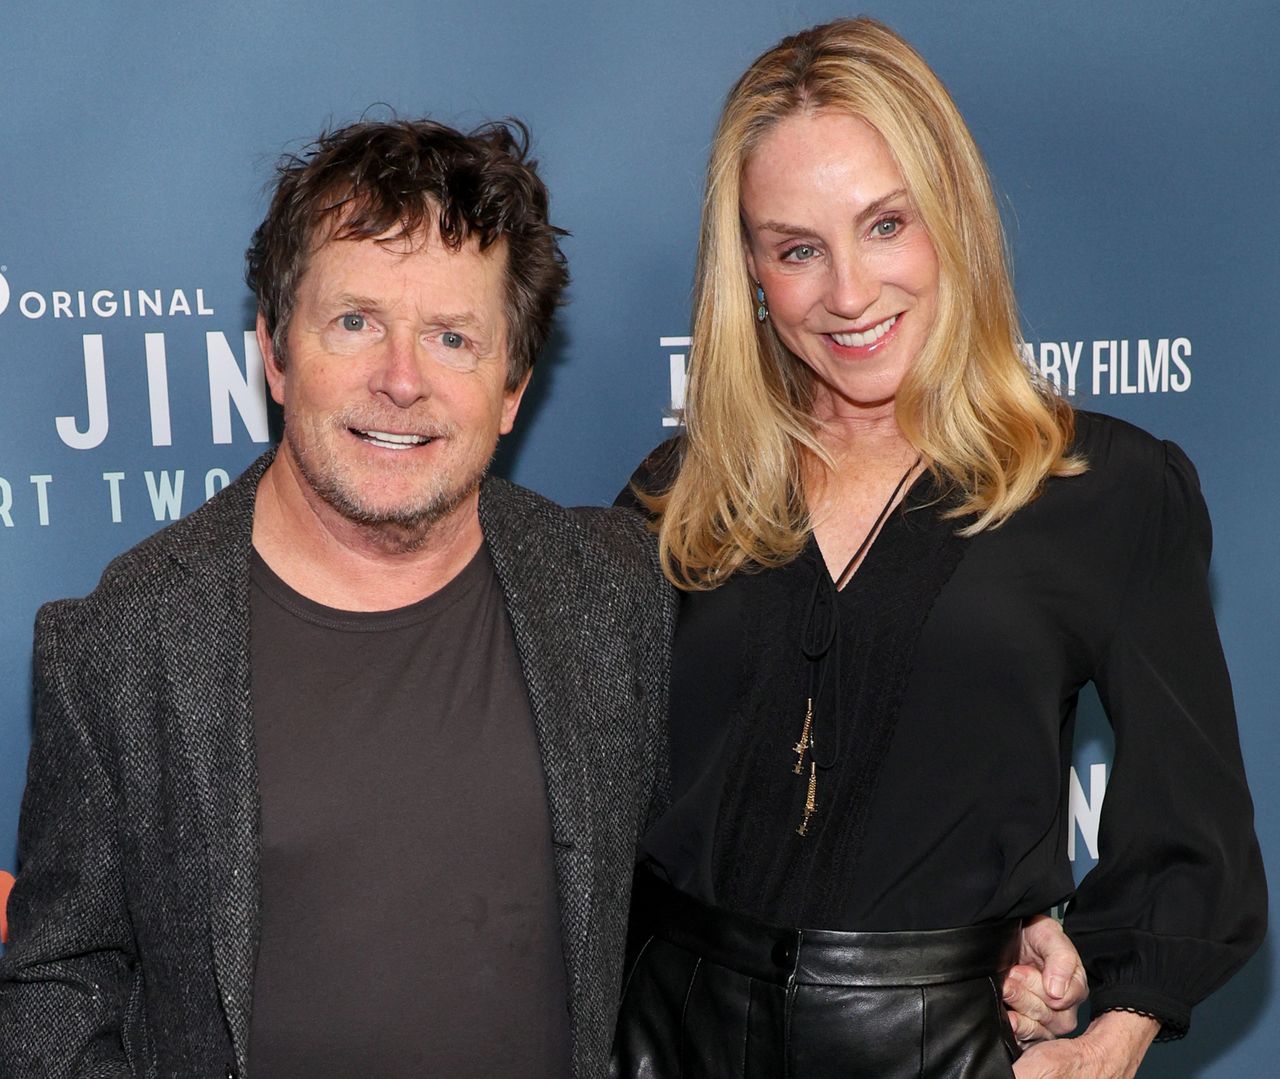 Michael J. Fox has been in a relationship with Tracy Pollan for years.